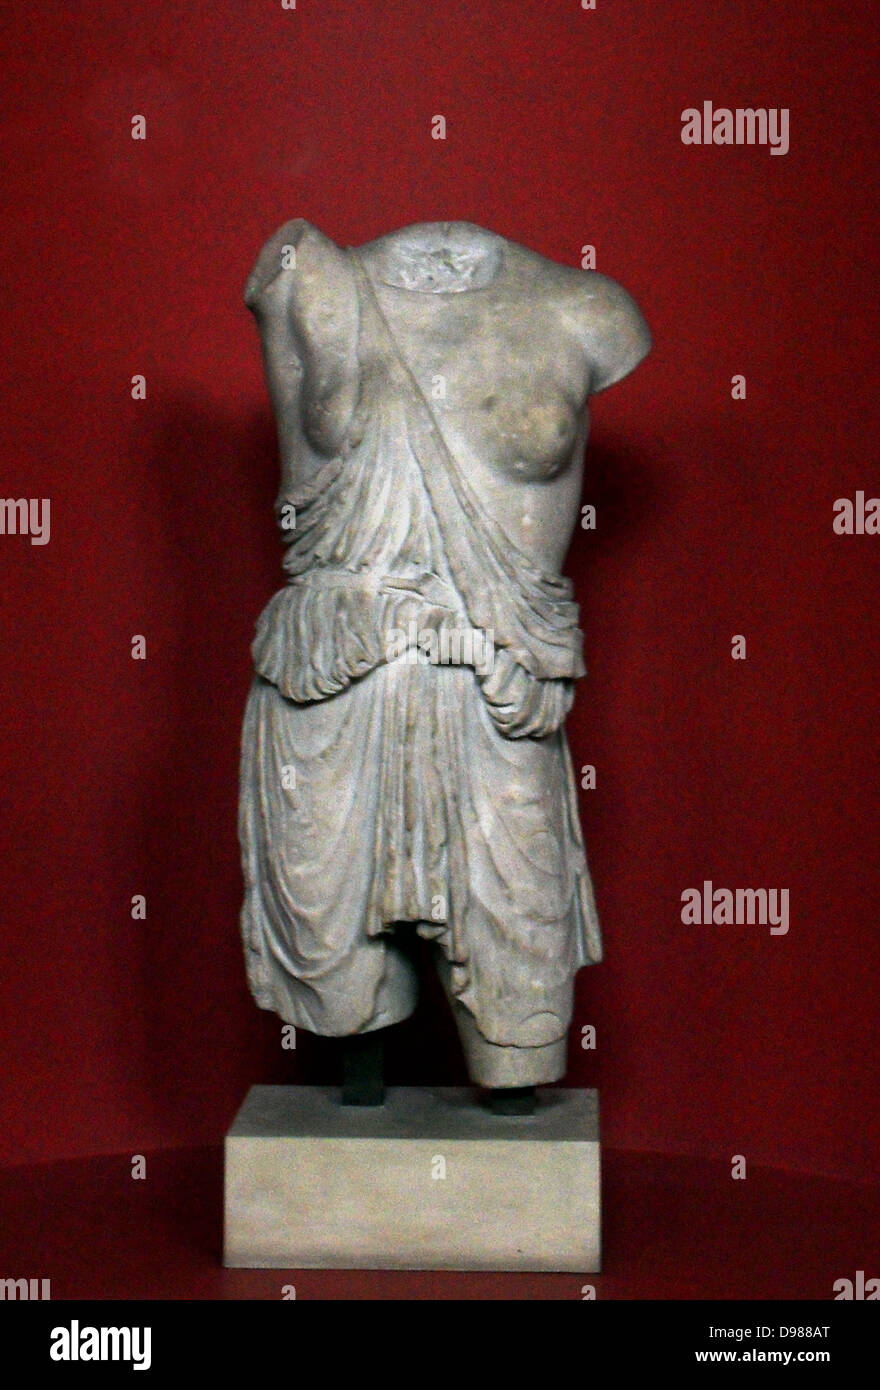 Roman statue of an amazon (legendary female warrior), 120-130 AD after an earlier greek version of the 5th century BC. Stock Photo